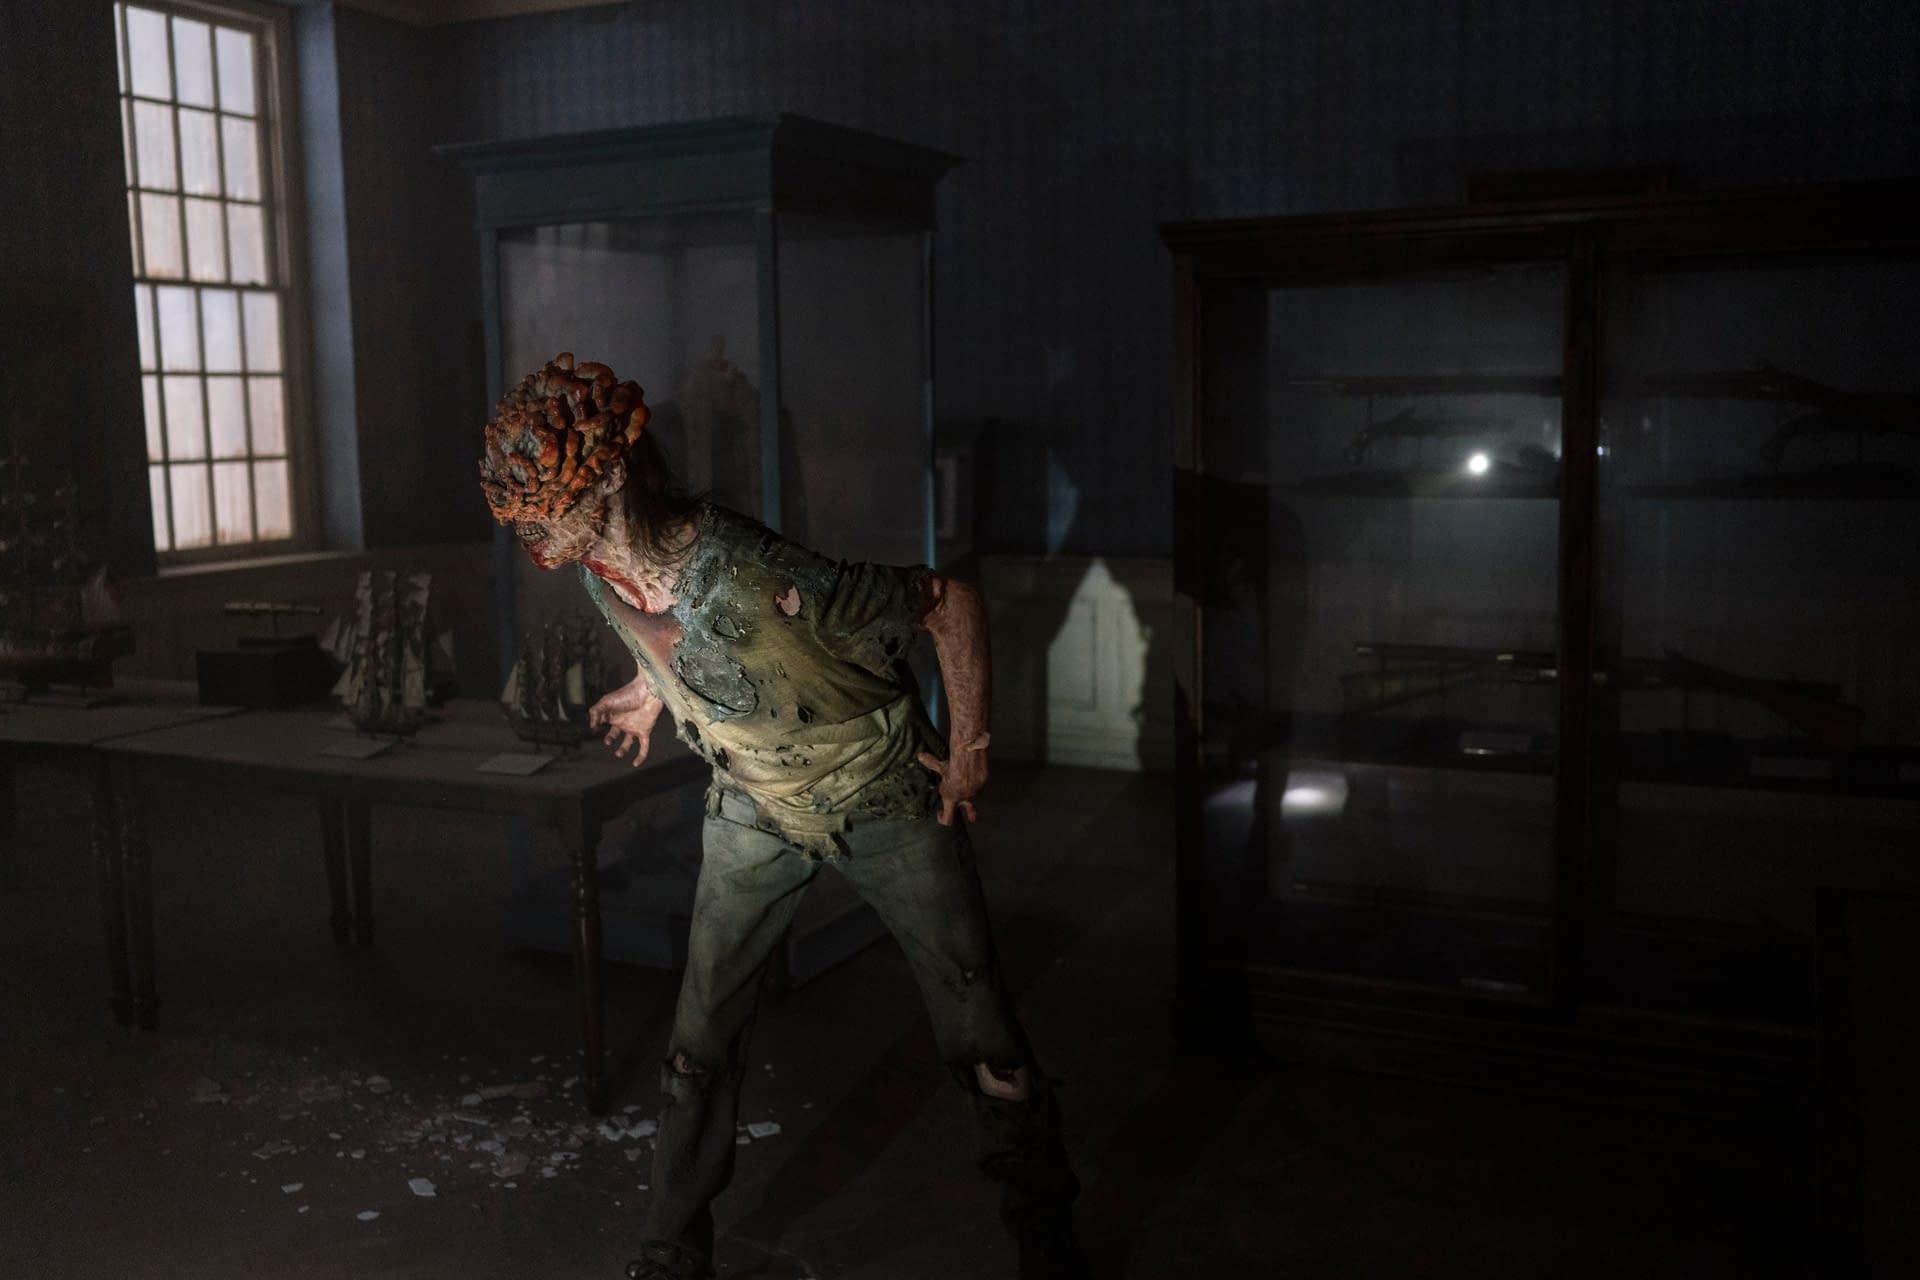 The Last Of Us Series Will Surprise Tommy Fans, Says Star